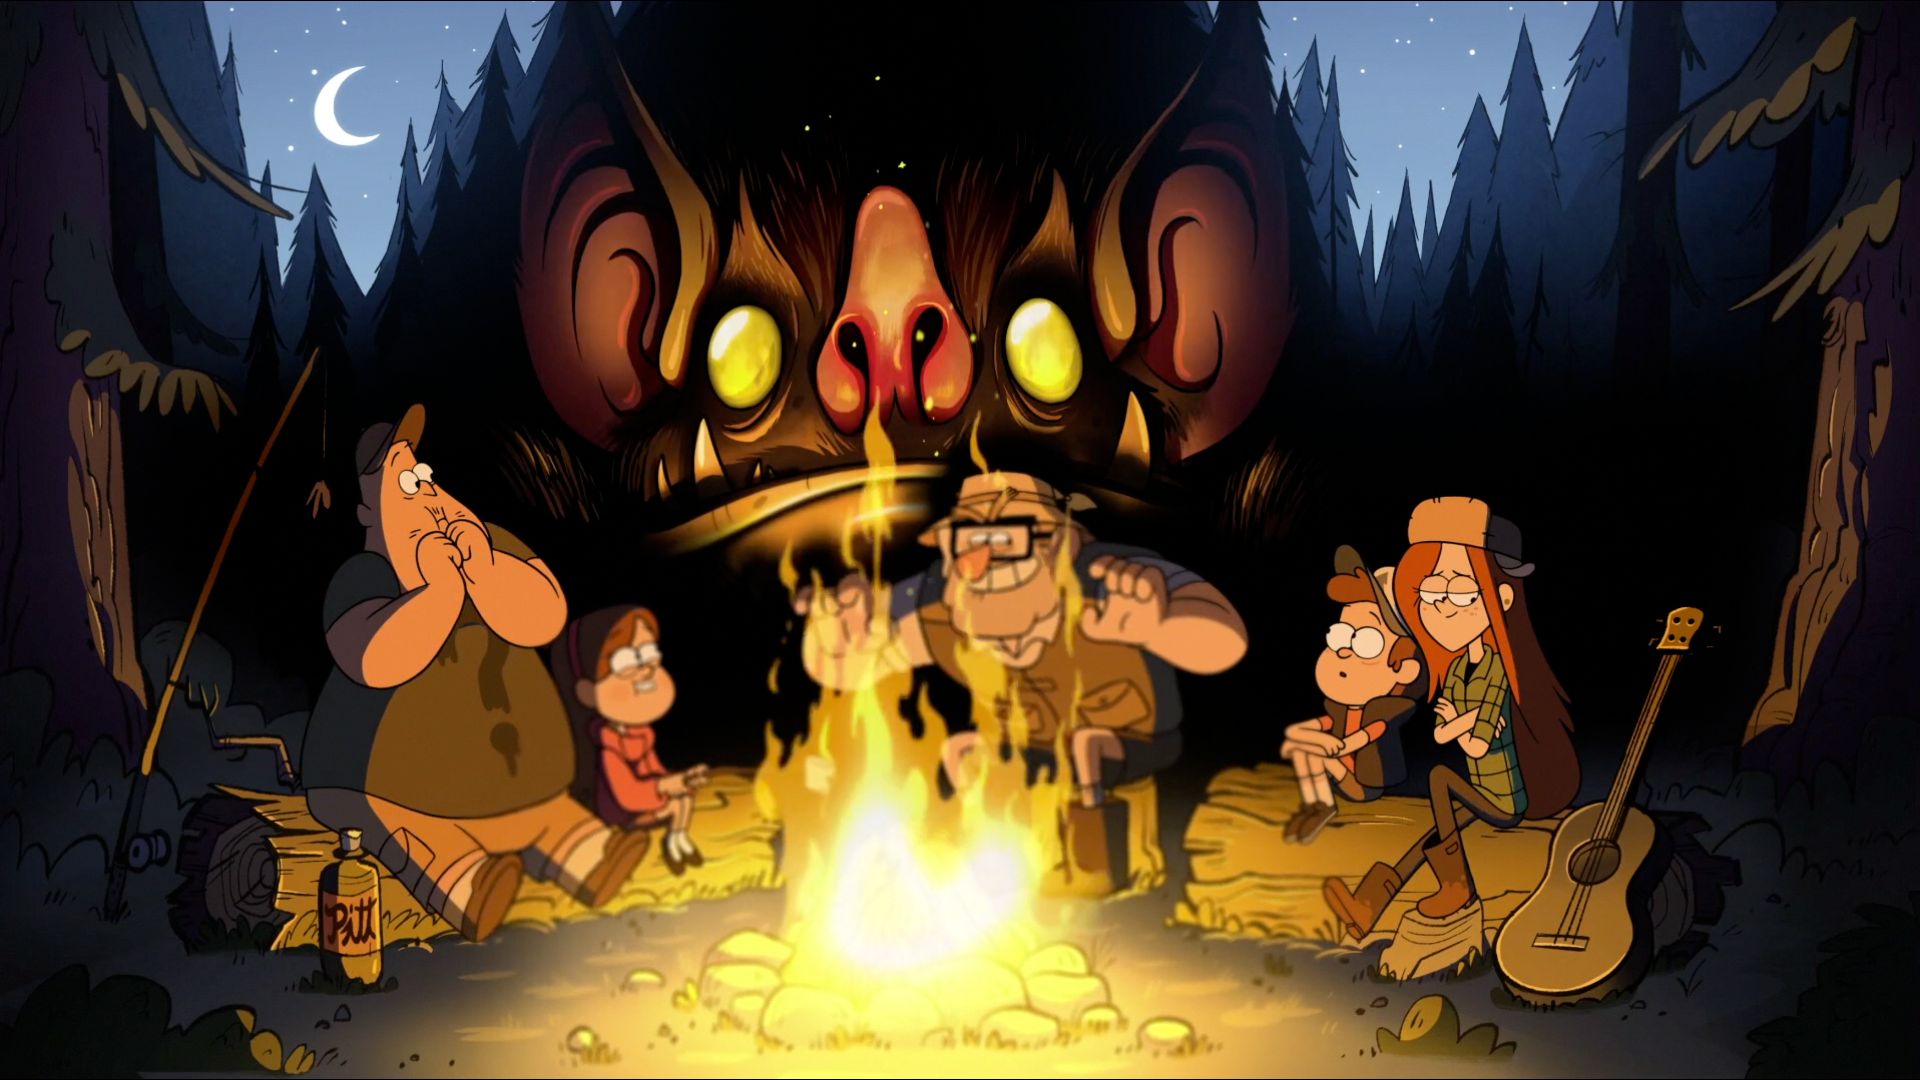 Live Wallpapers - Gravity Falls - YouTube